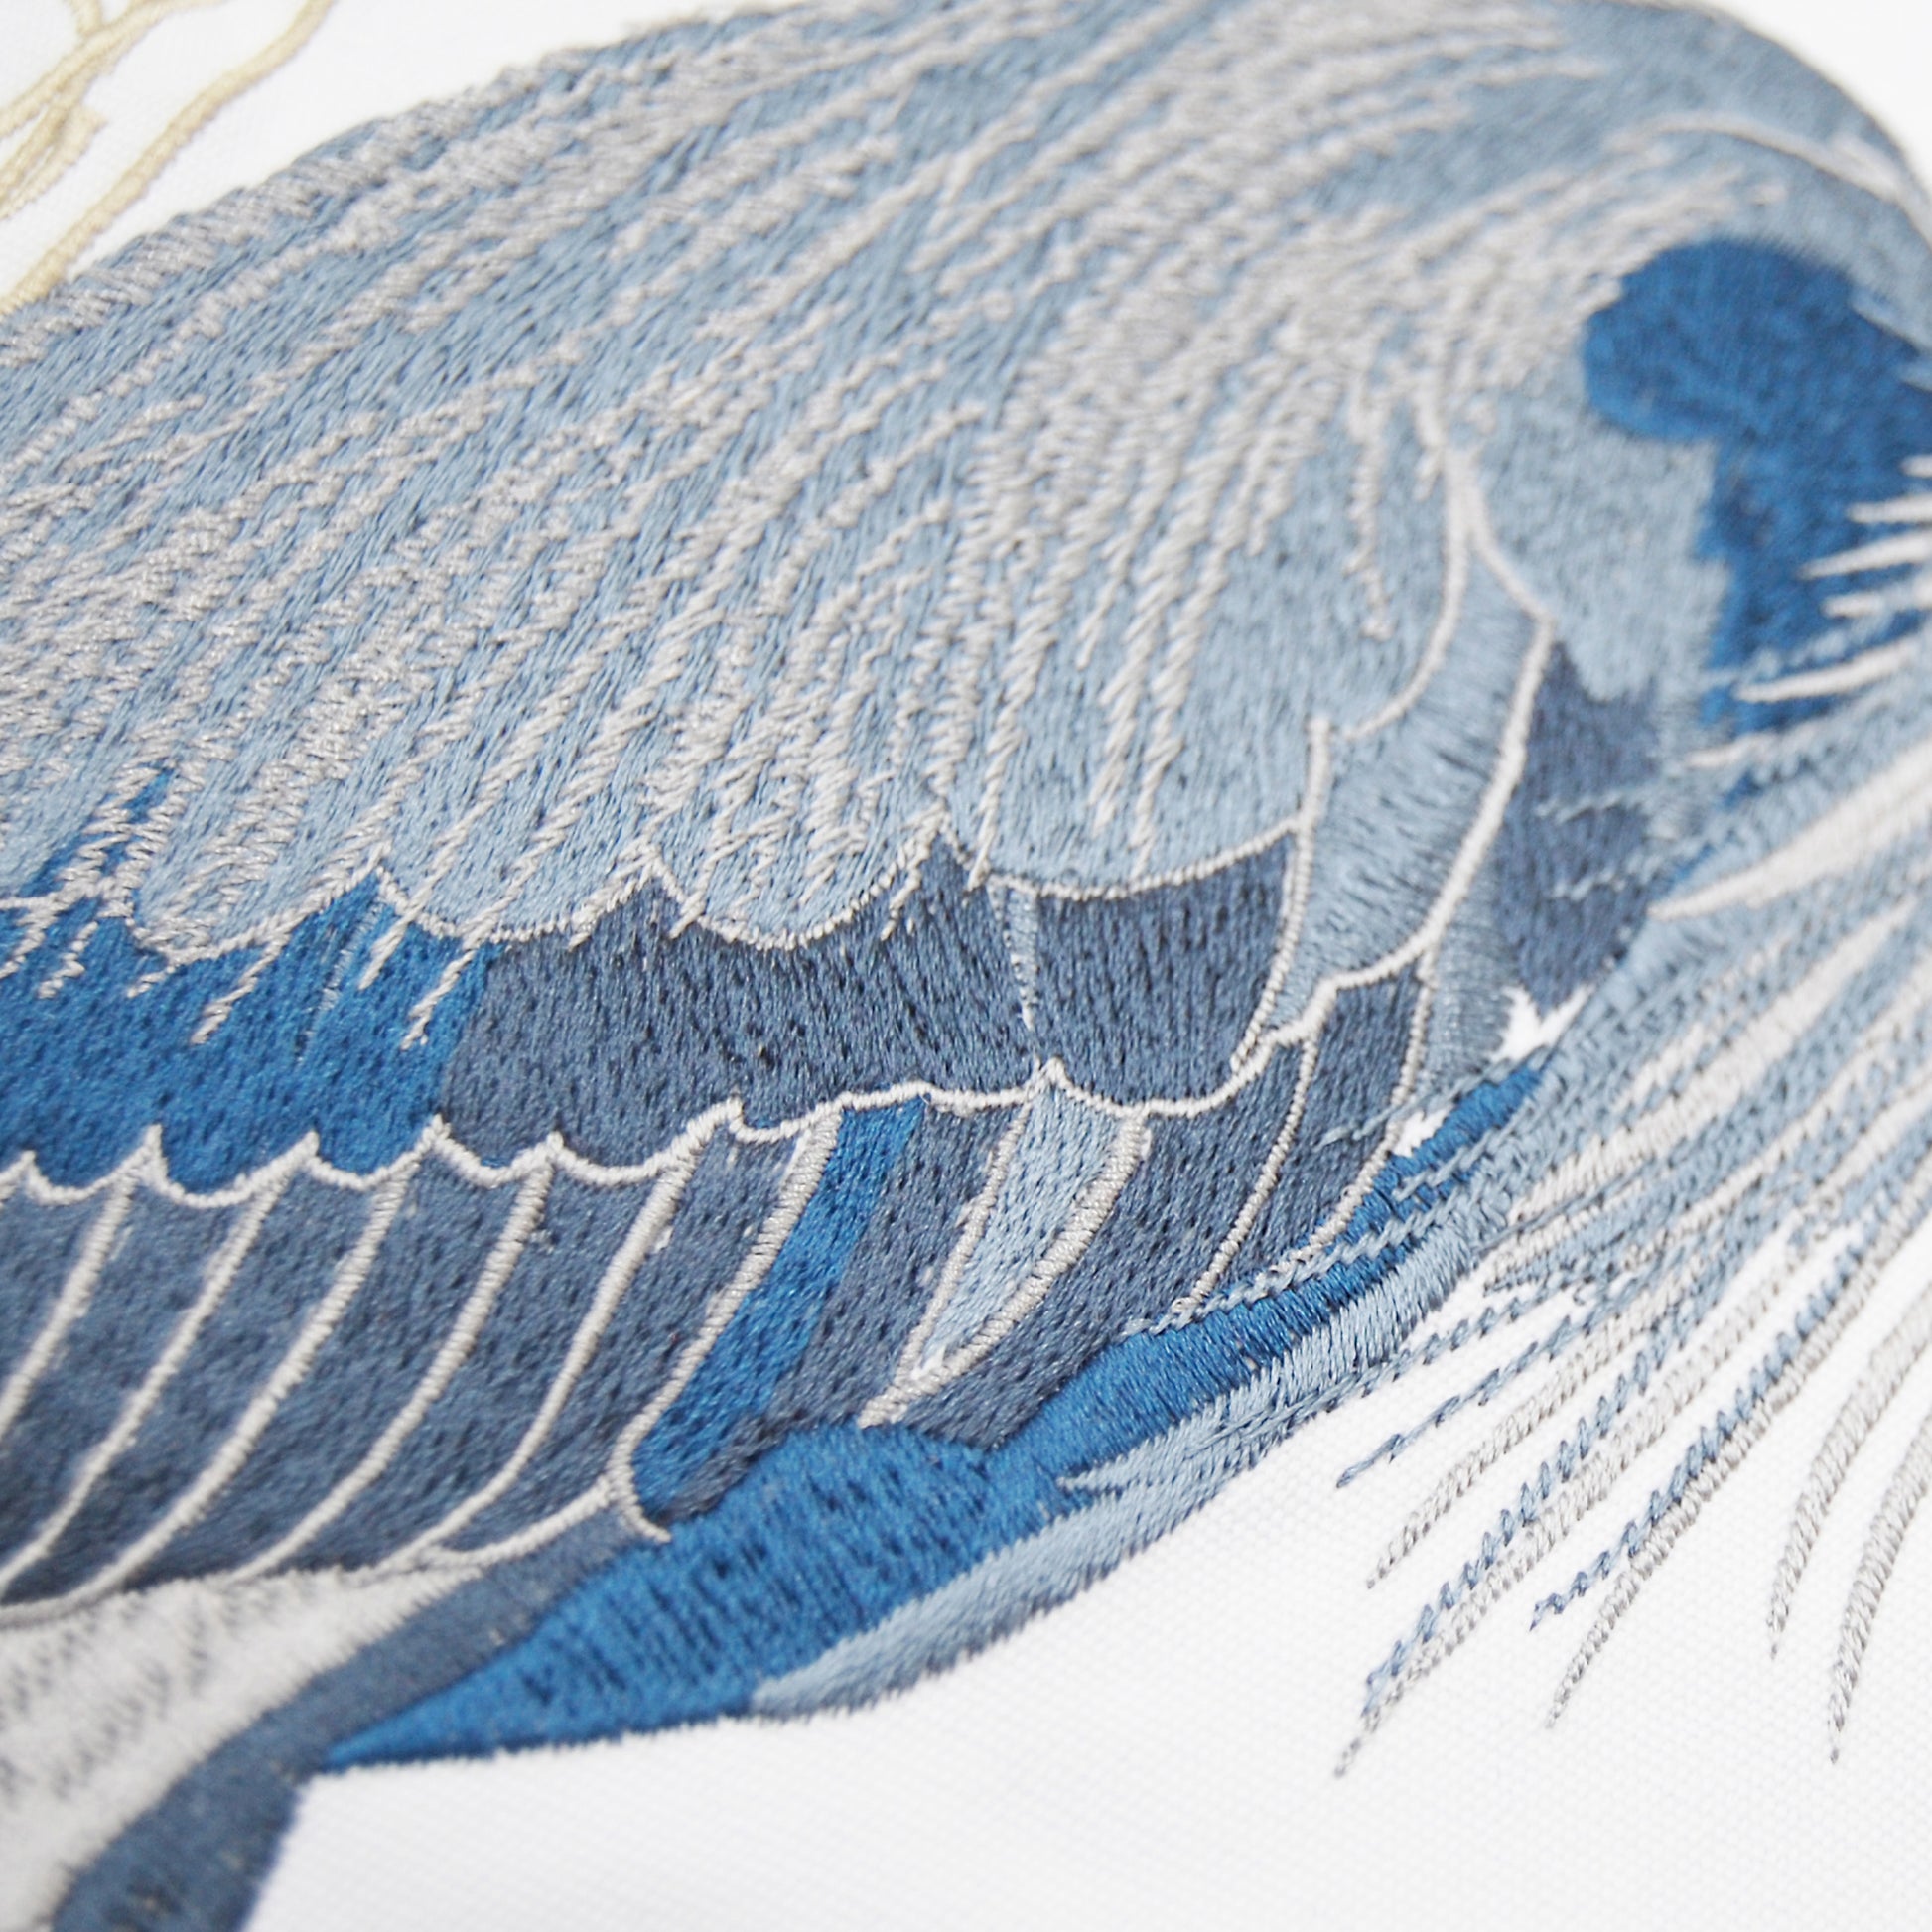 Detailed shot of the embroidery work on the blue herons feathers.